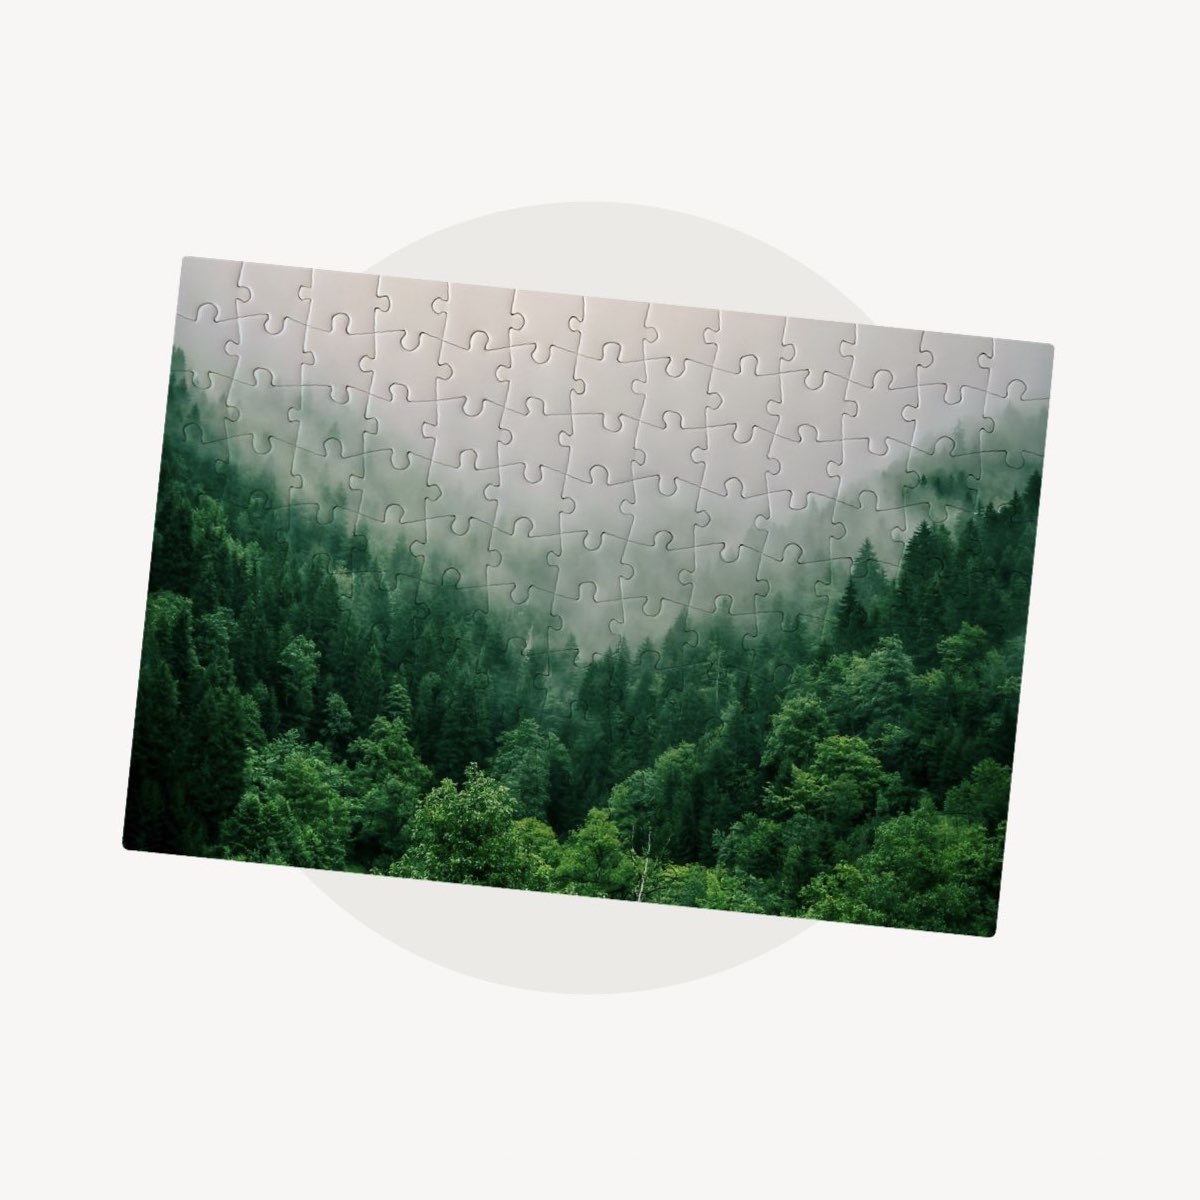 A small jigsaw puzzle with a foggy forest printed on it